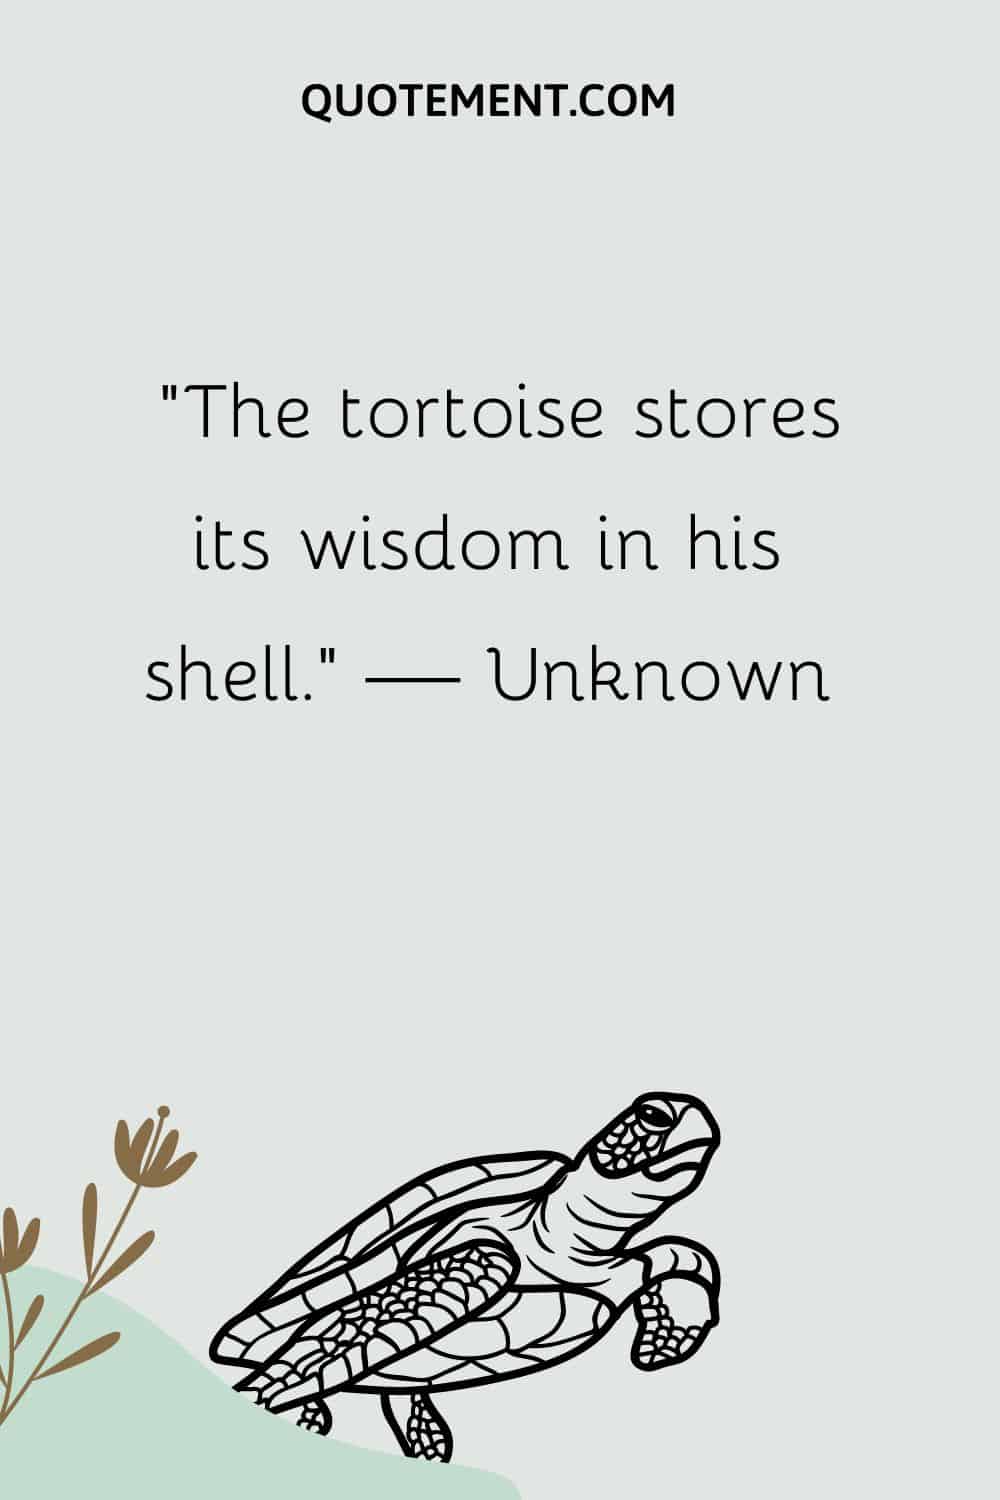 The tortoise stores its wisdom in his shell